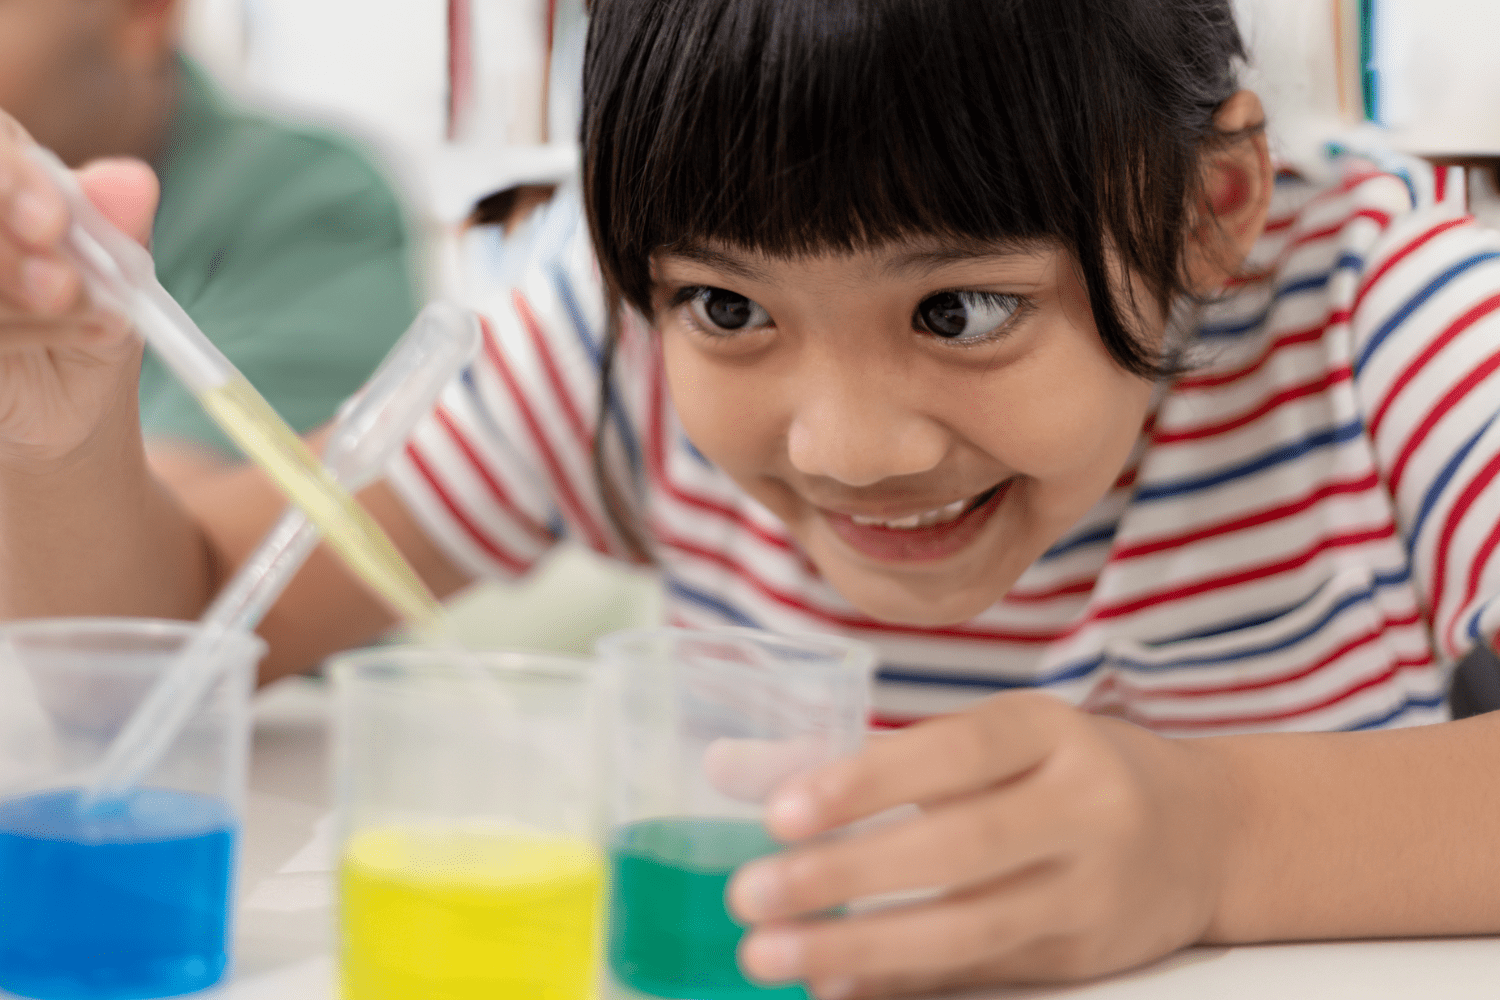 A girl experiments with colorful liquids.